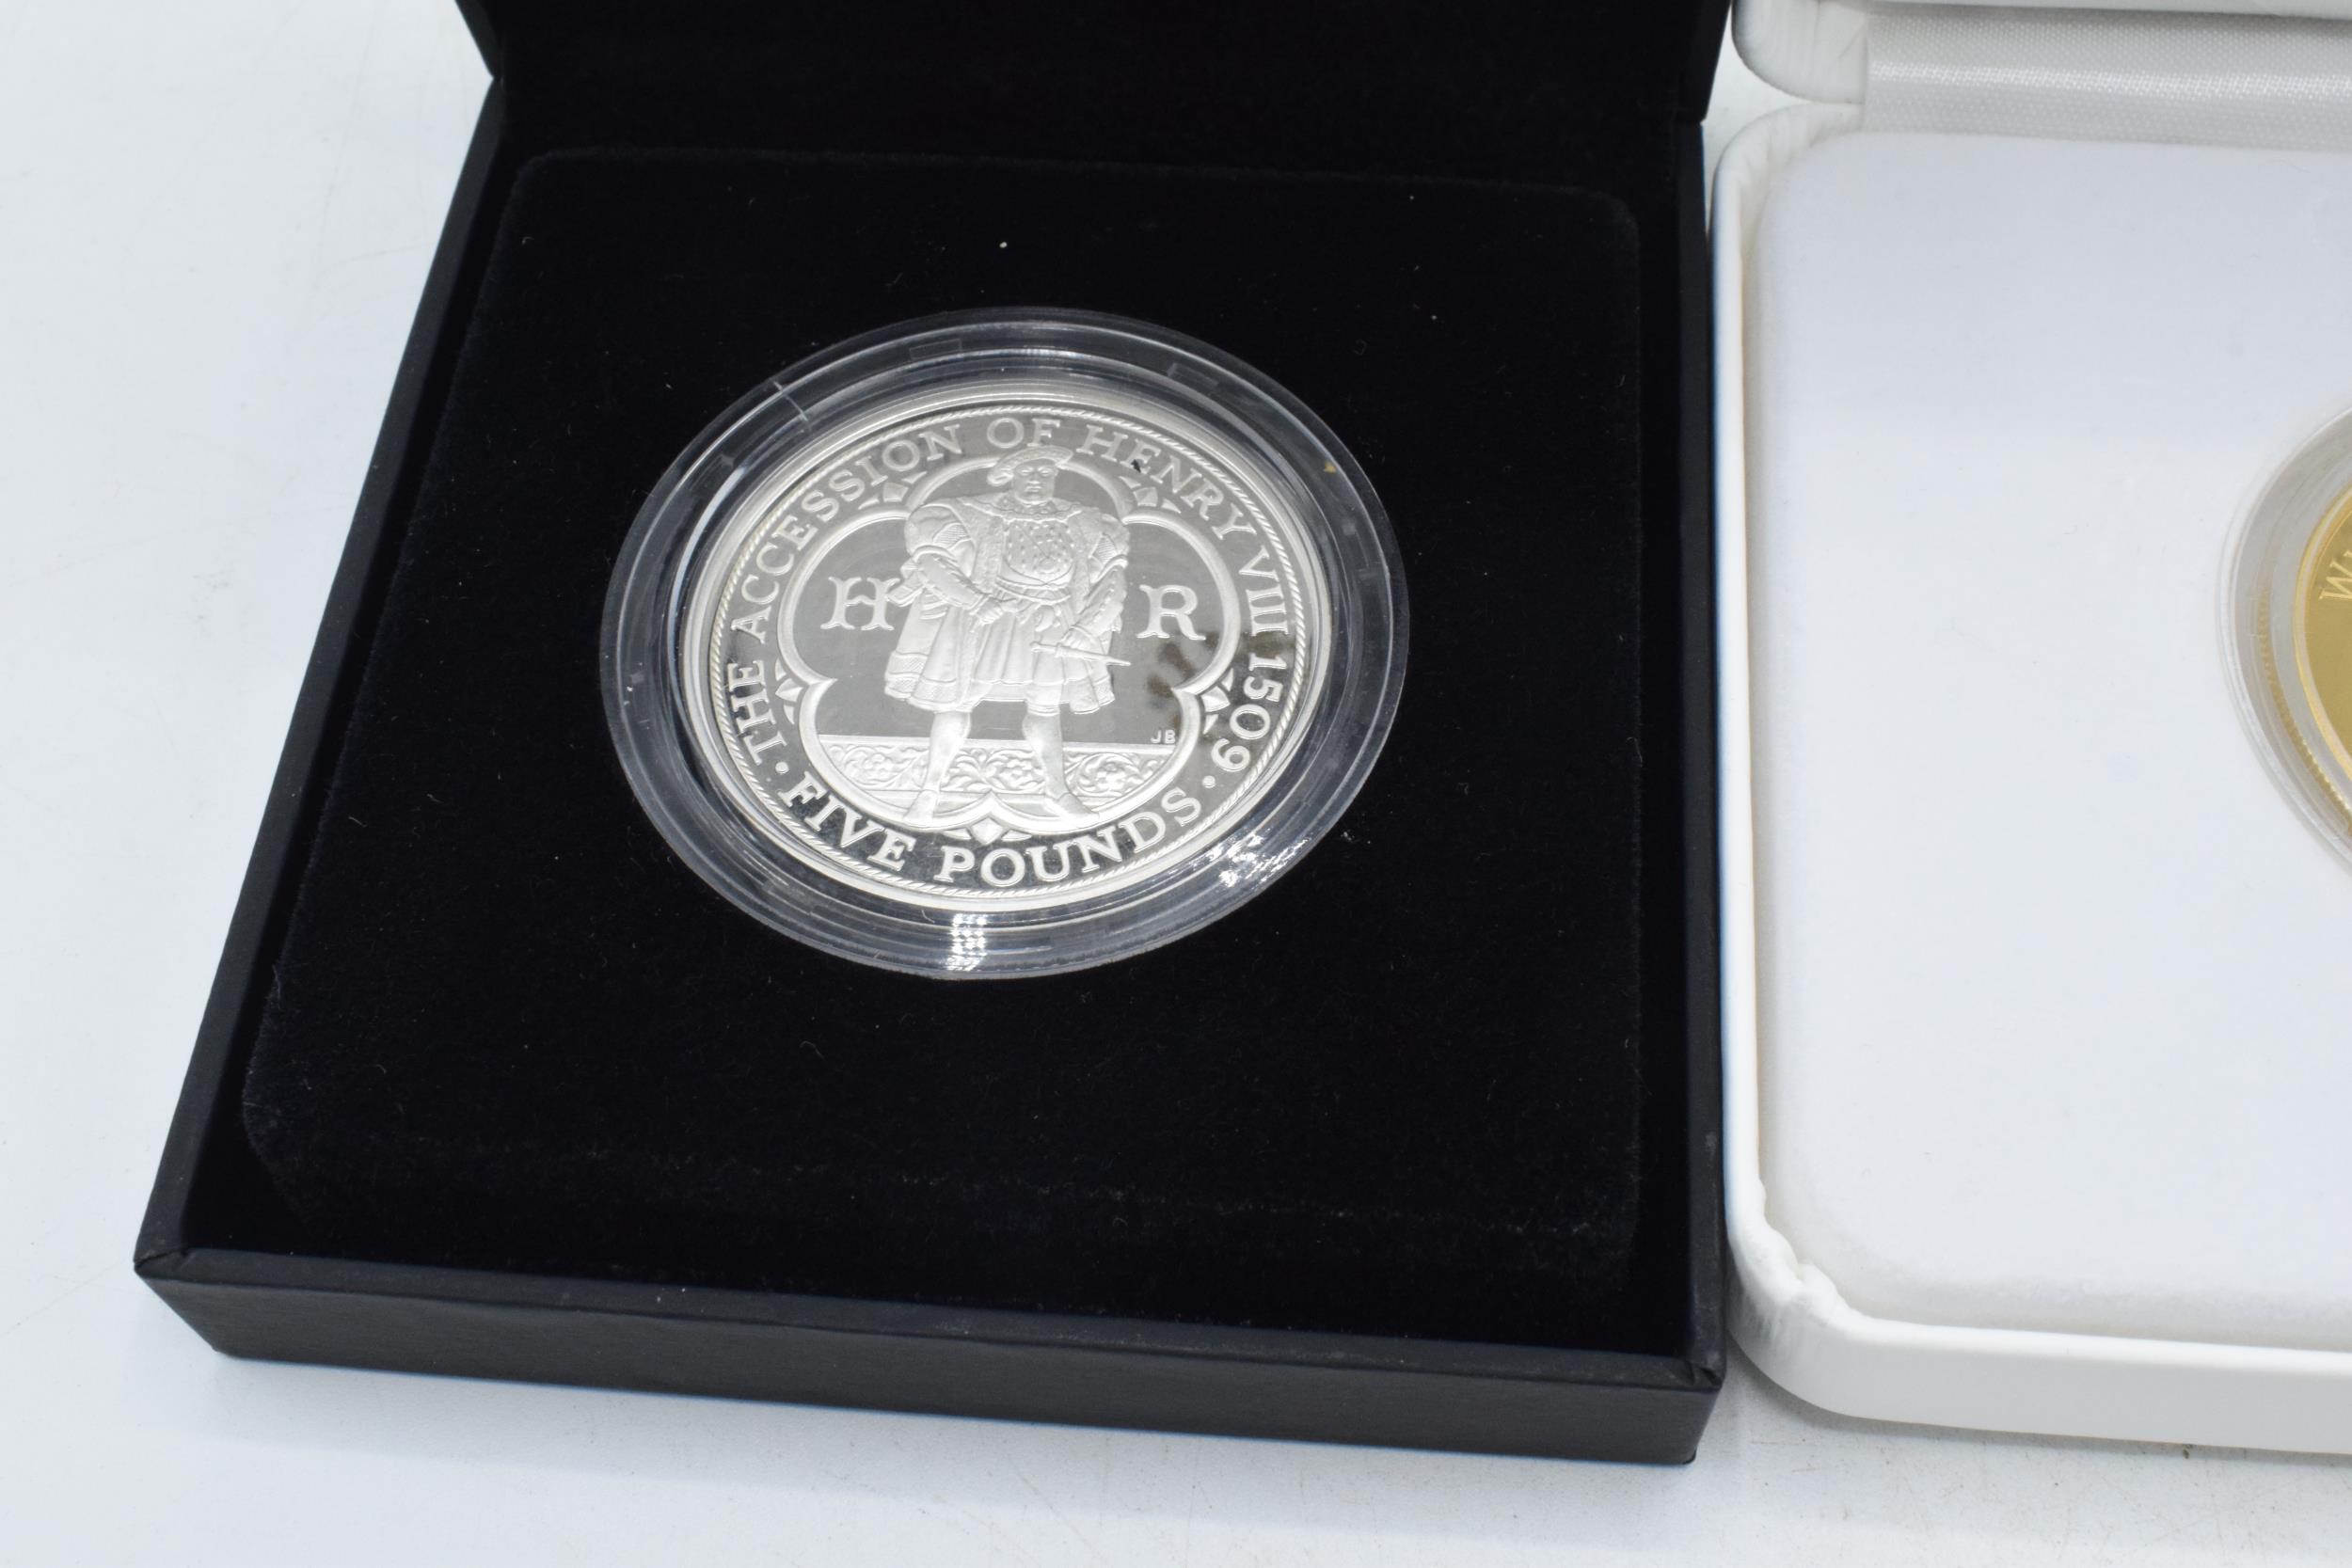 Boxed The Royal Mint Jersey 2009 Henry VIII silver proof Piedfort £5 coin and a William & - Image 5 of 5